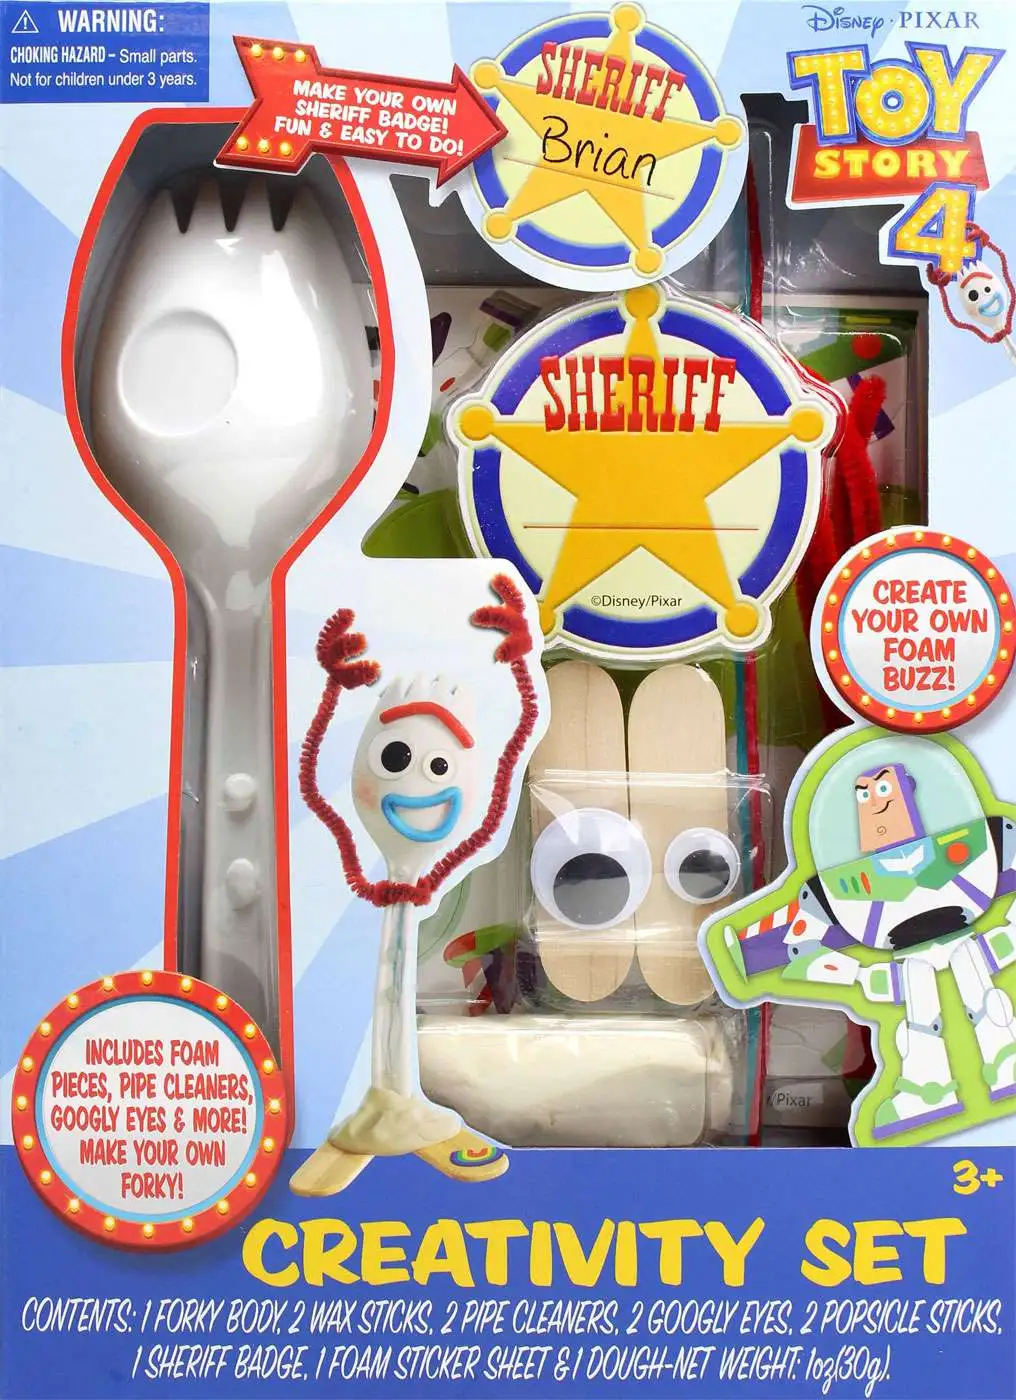 Disney and Pixar Toy Story 4 DIY Forky Signature Collection Replica Figure